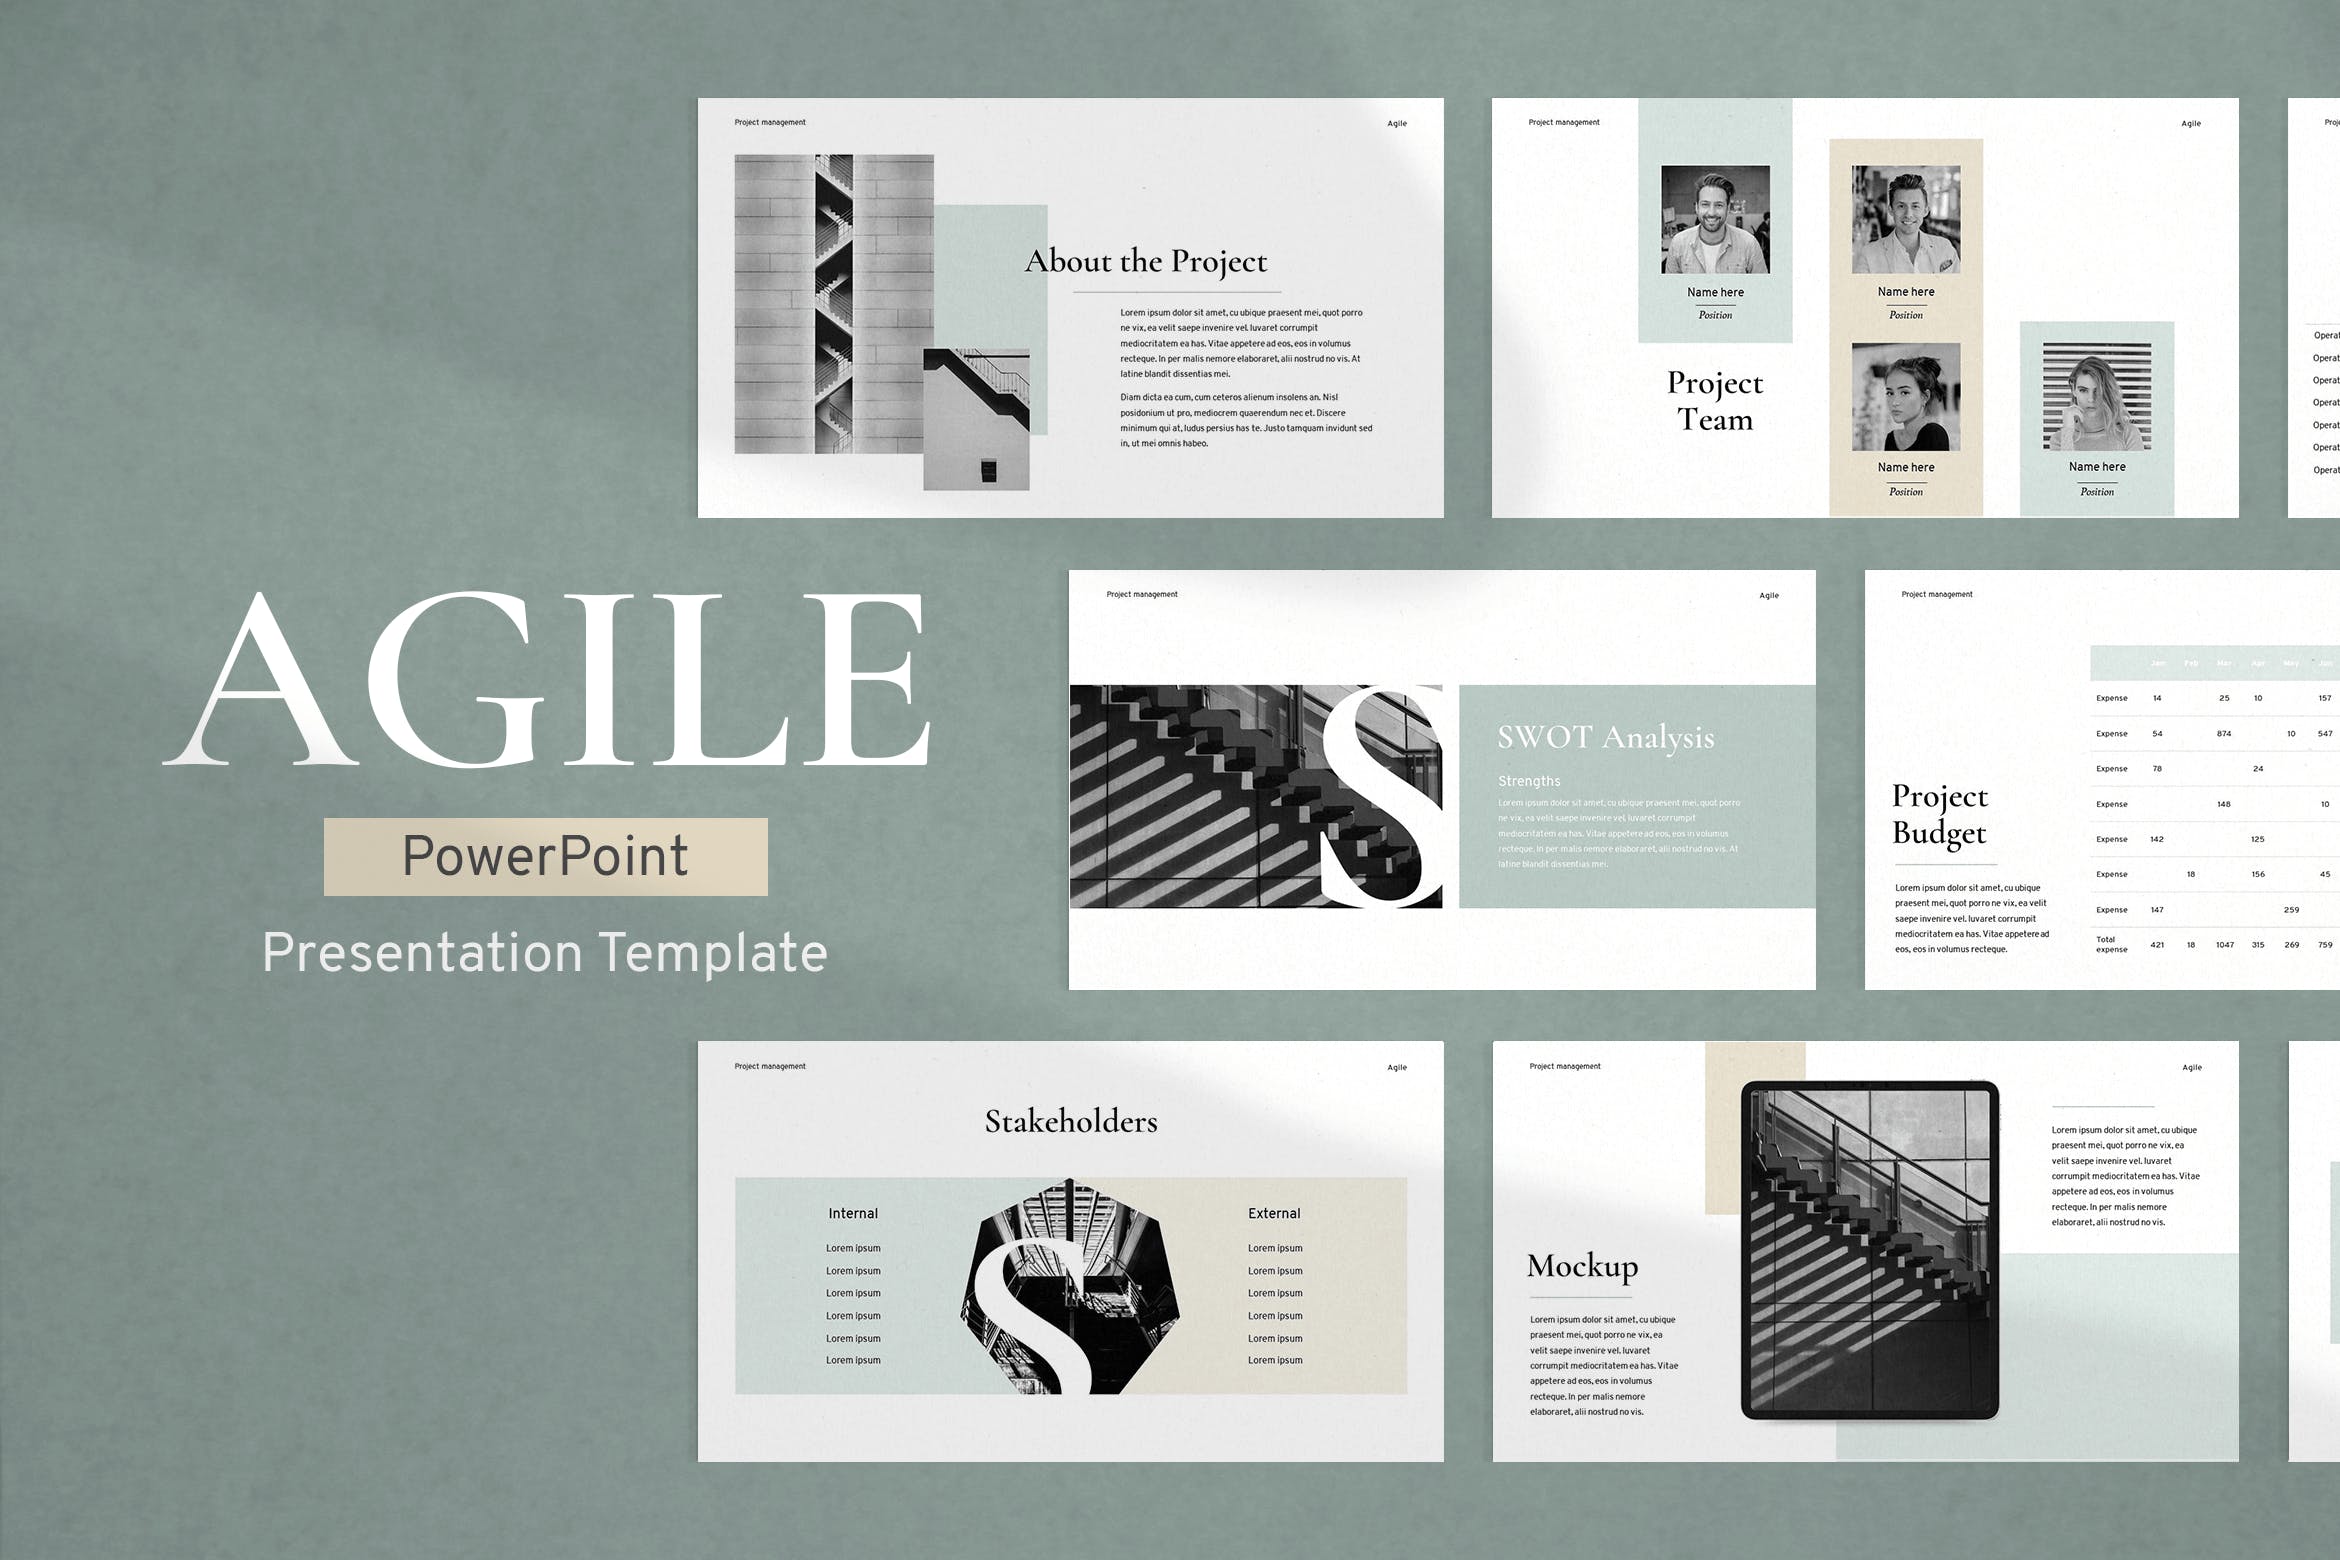 Cover image of The Agile Project Management Presentation Template.